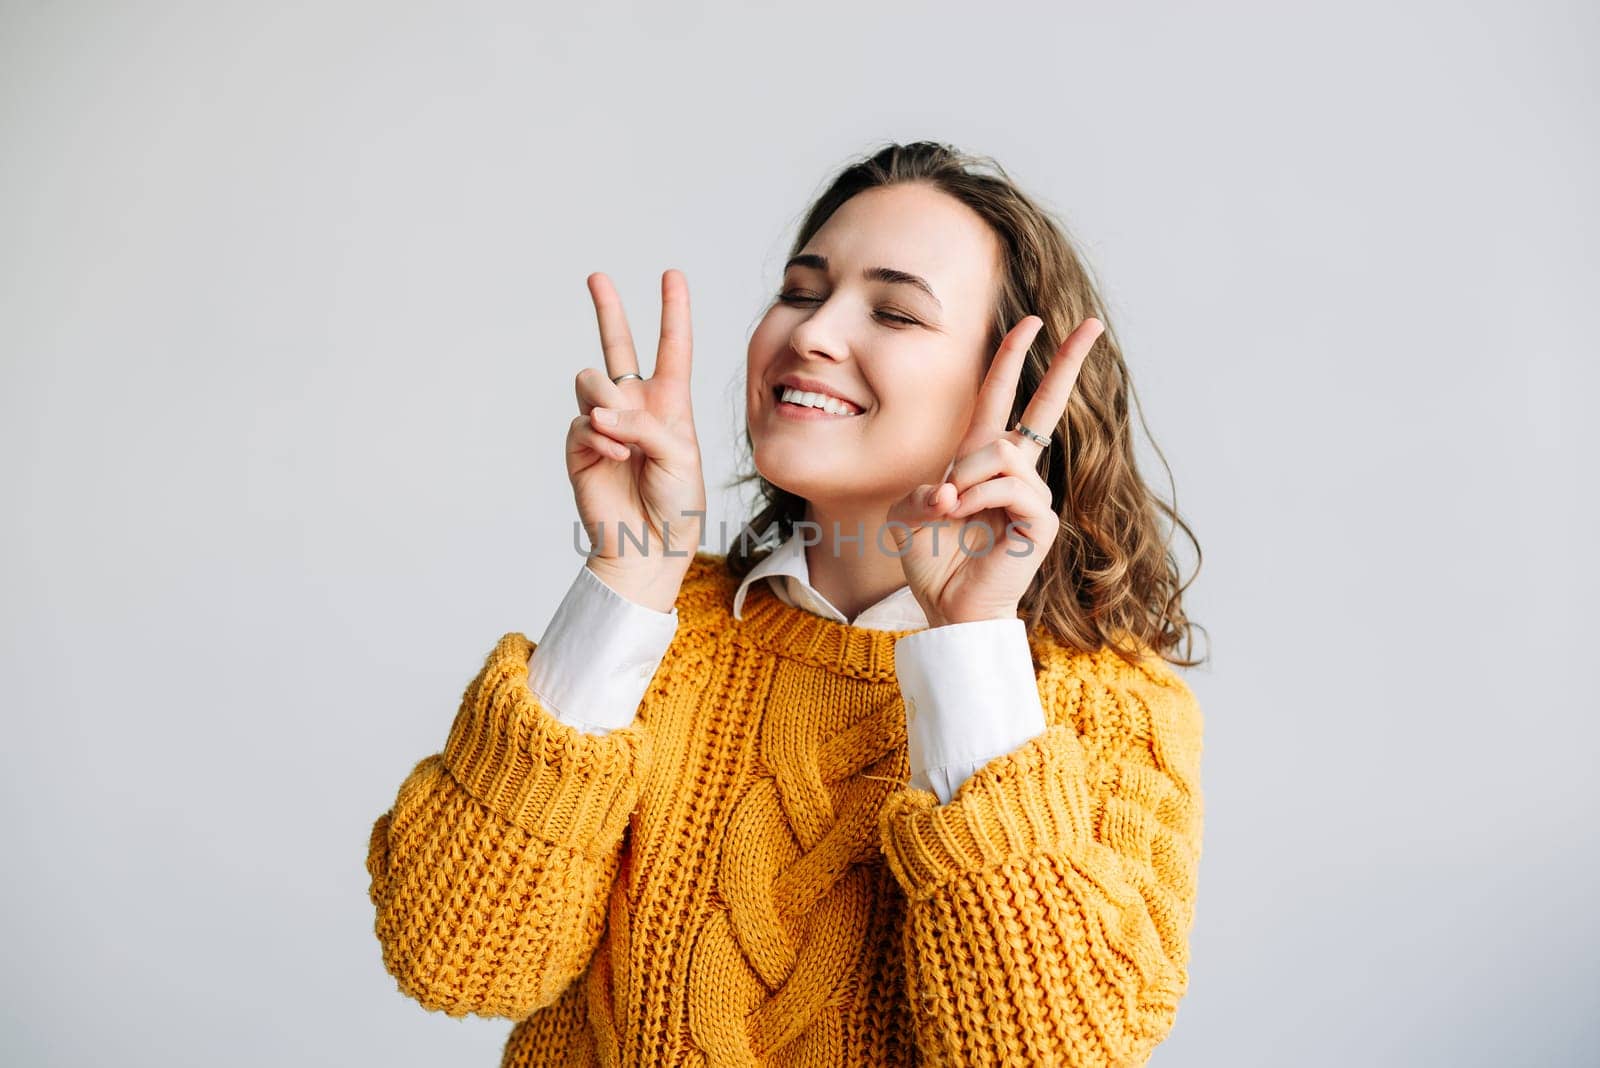 Young Woman Model Poses with Joyful Gestures - Cheerful, Playful, and Pretty - Smiling and Laughing with Victory and Peace Signs - Positive and Cute Expression - Joyful Isolation on White Background